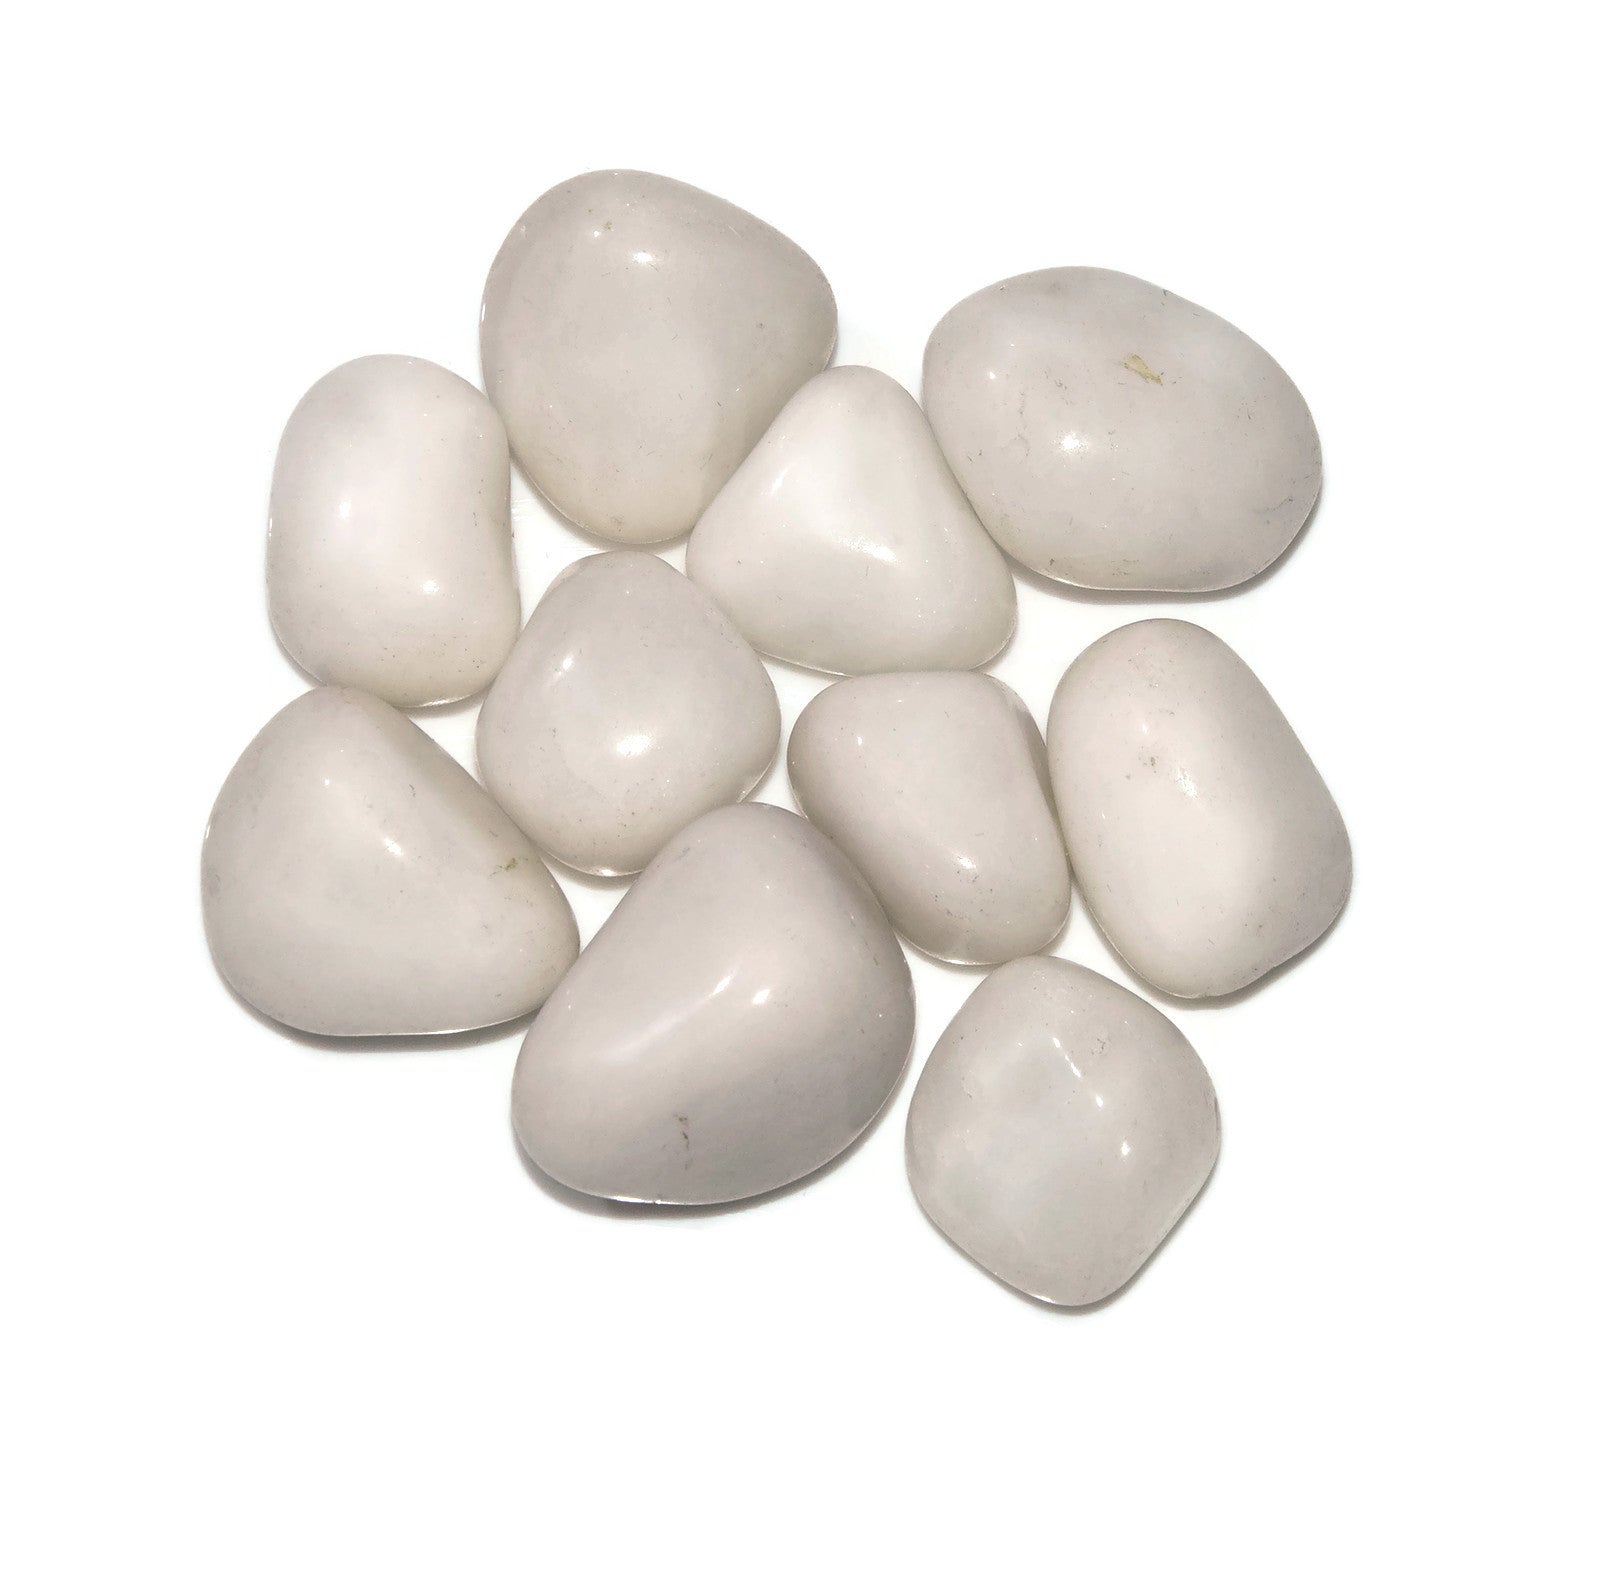 White Agate Tumbled 10 Piece – Healing Crystals India